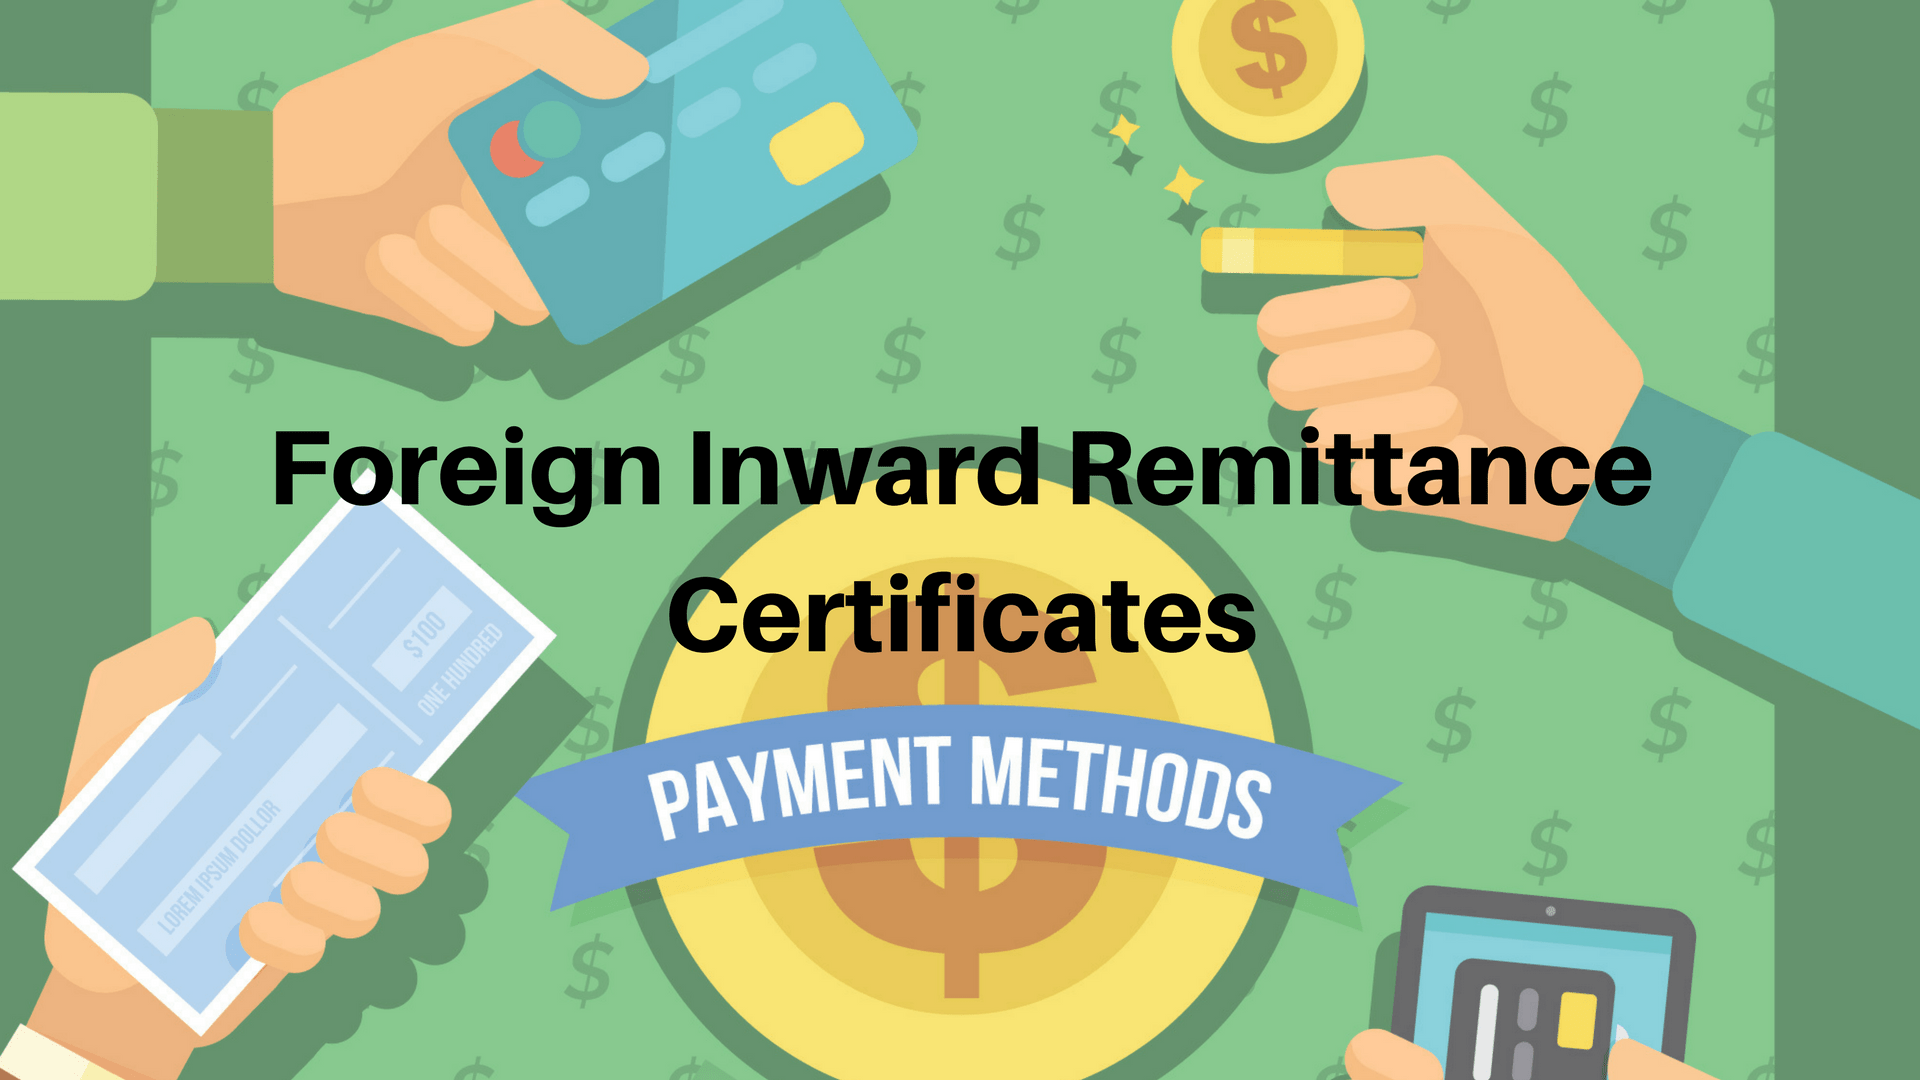 Foreign Inward Remittance Certificates